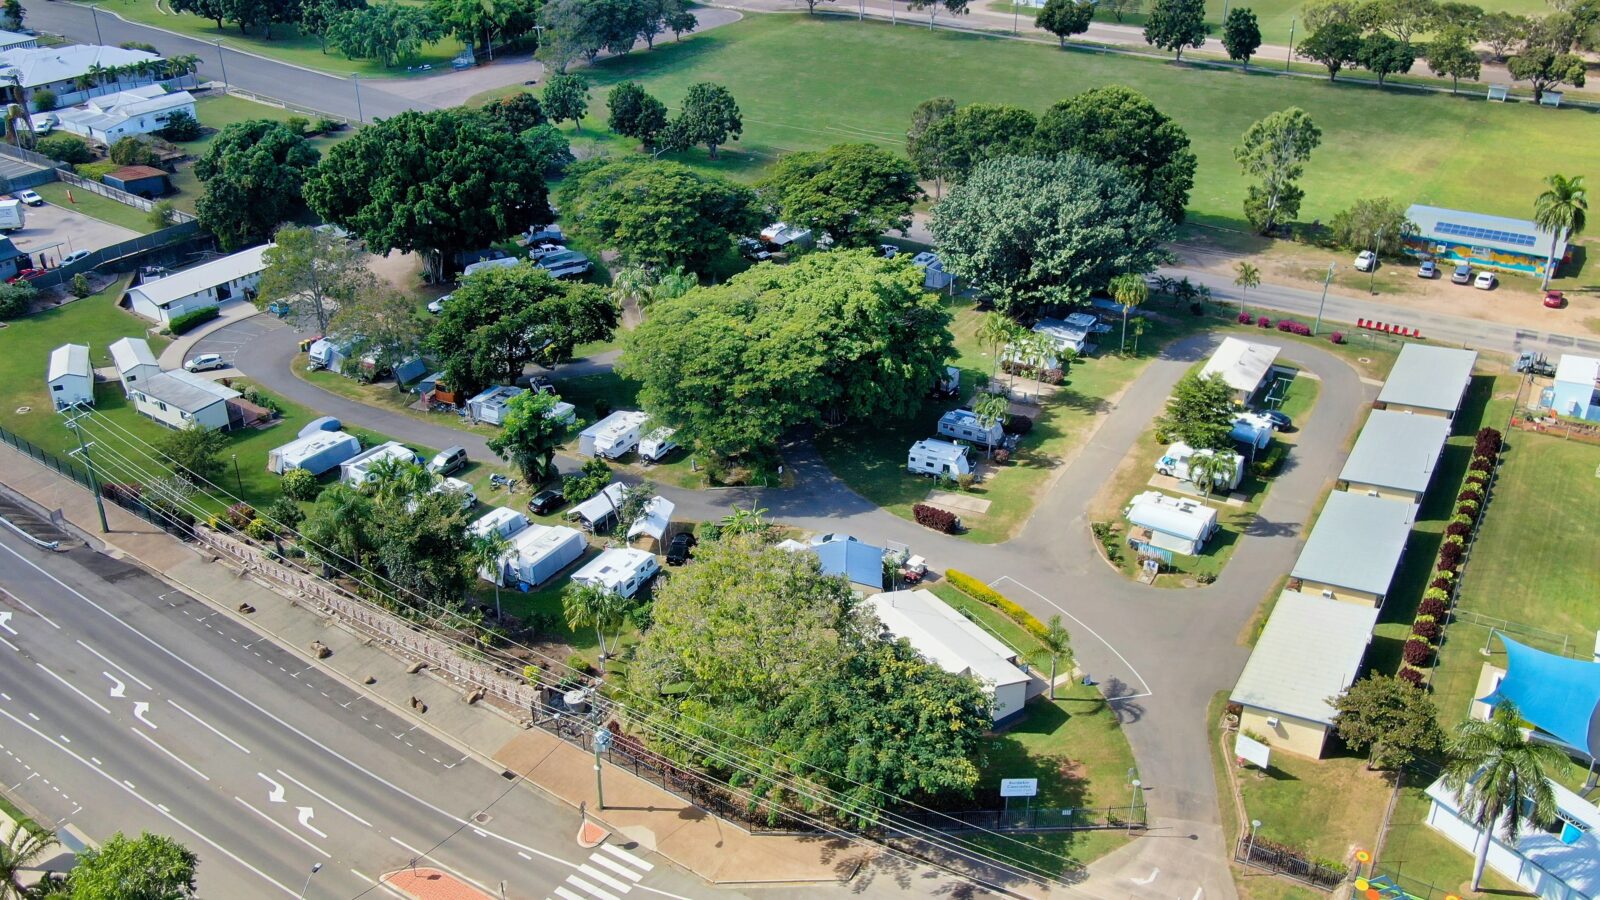 Aerial picture shows caravan park layout and the tree coverage.